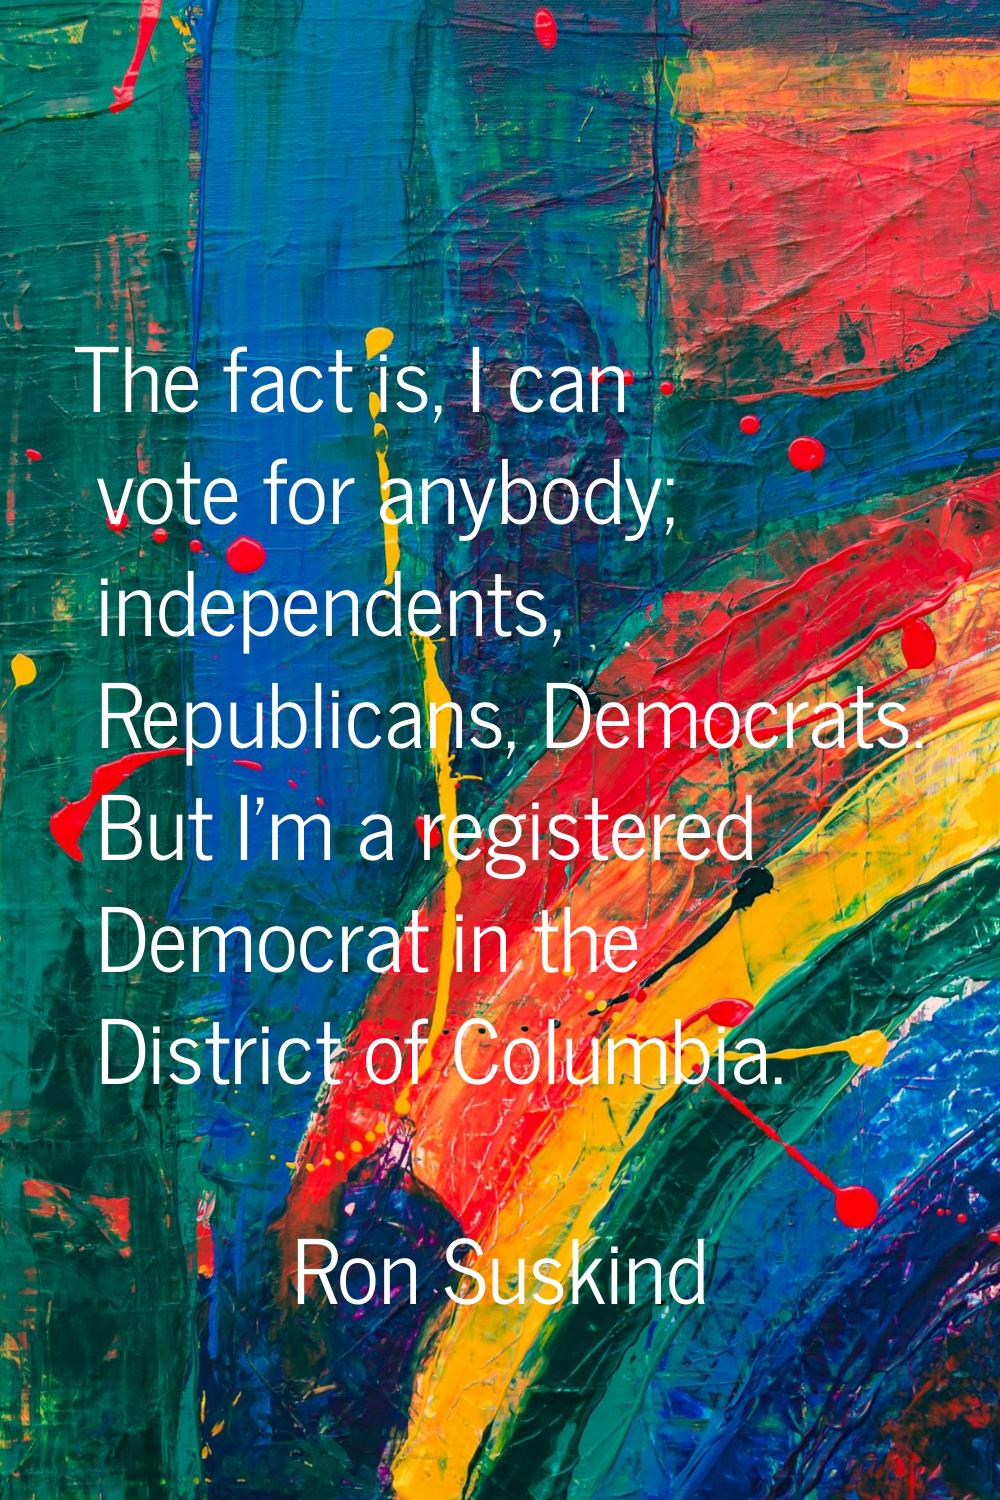 The fact is, I can vote for anybody; independents, Republicans, Democrats. But I'm a registered Dem